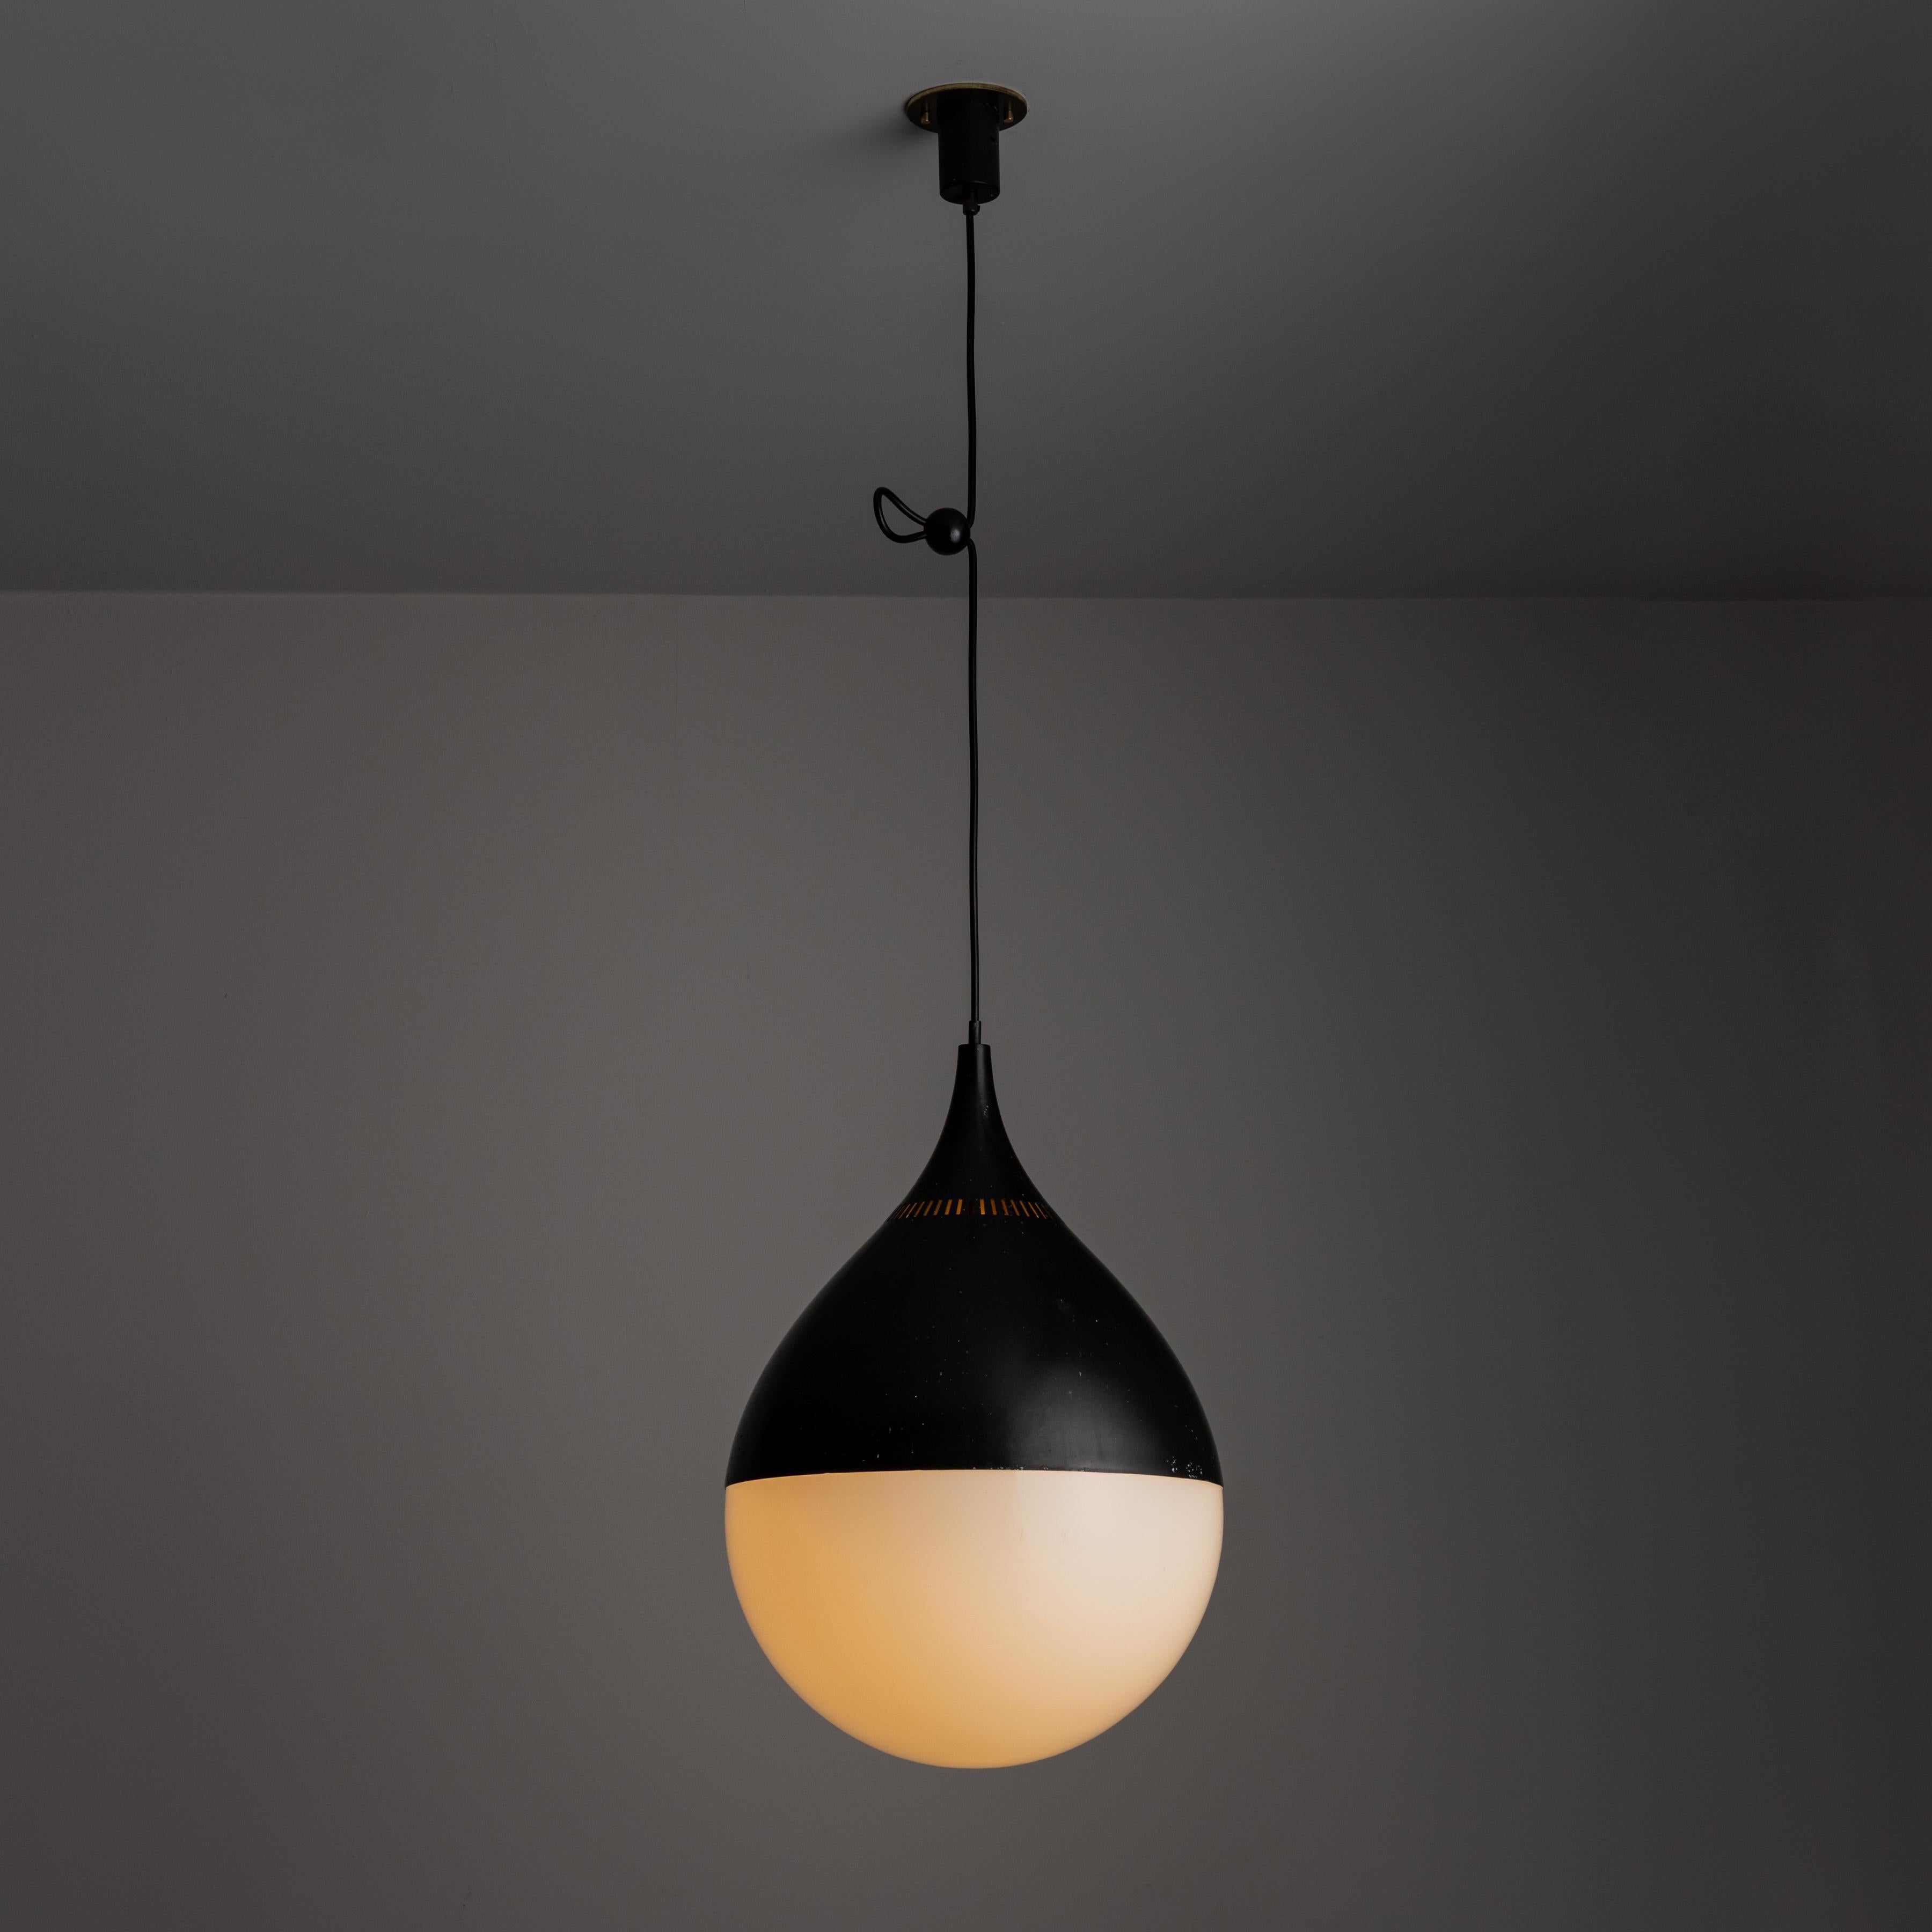 Rare model 622 Ceiling Light for Stilnovo. Designed and manufactured in Italy in 1995. Minimal tear drop ceiling light with soft milk glass diffuser. Black enameled top half with perforations, allowing for an added element. This fixture holds one